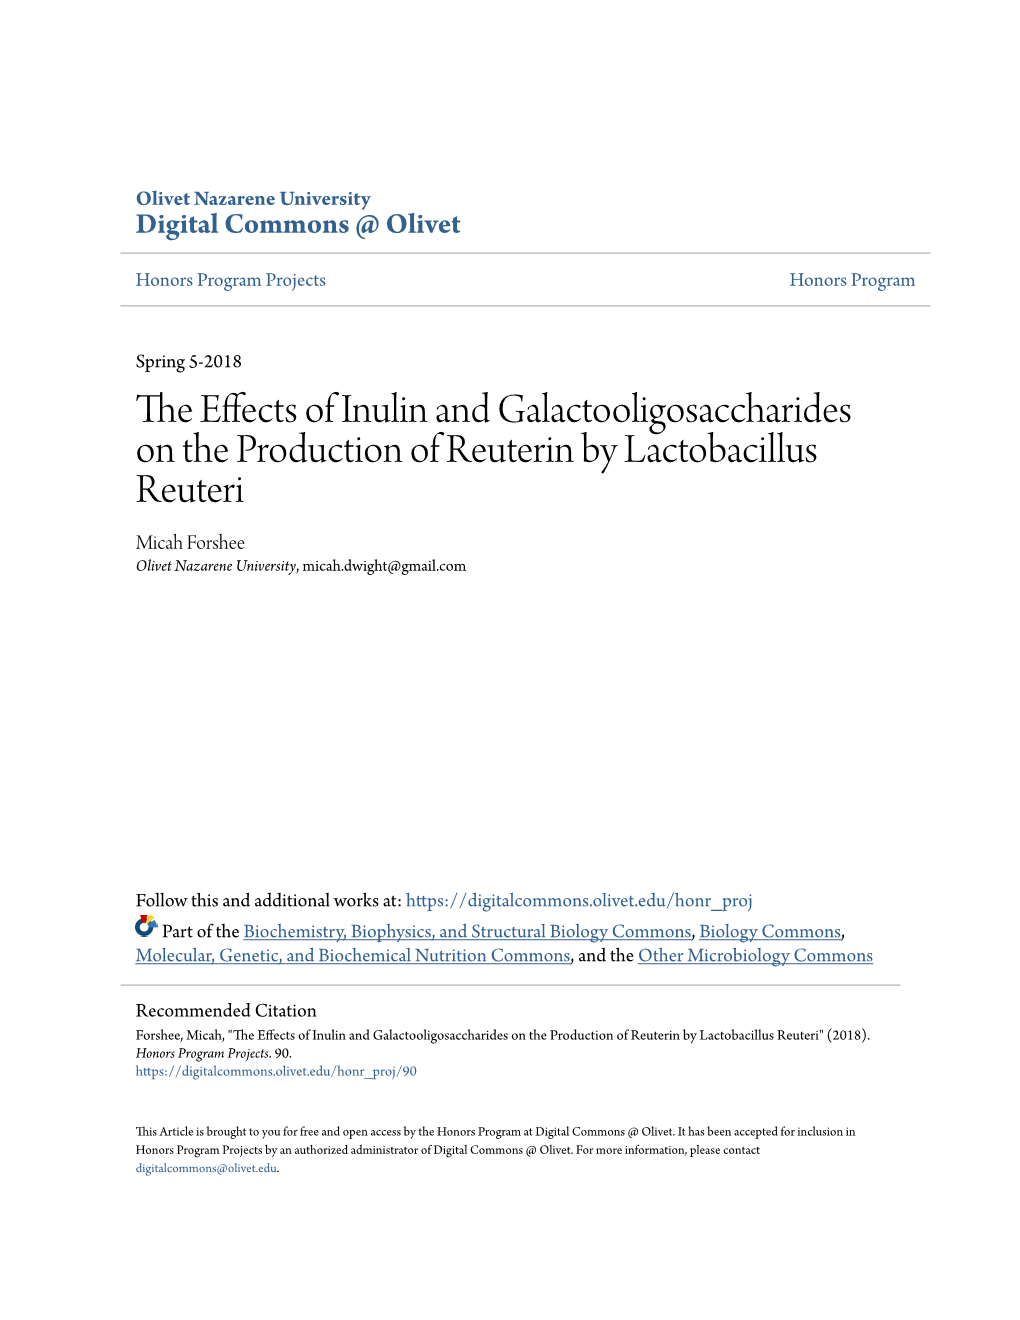 The Effects of Inulin and Galactooligosaccharides on the Production of Reuterin by Lactobacillus Reuteri" (2018)